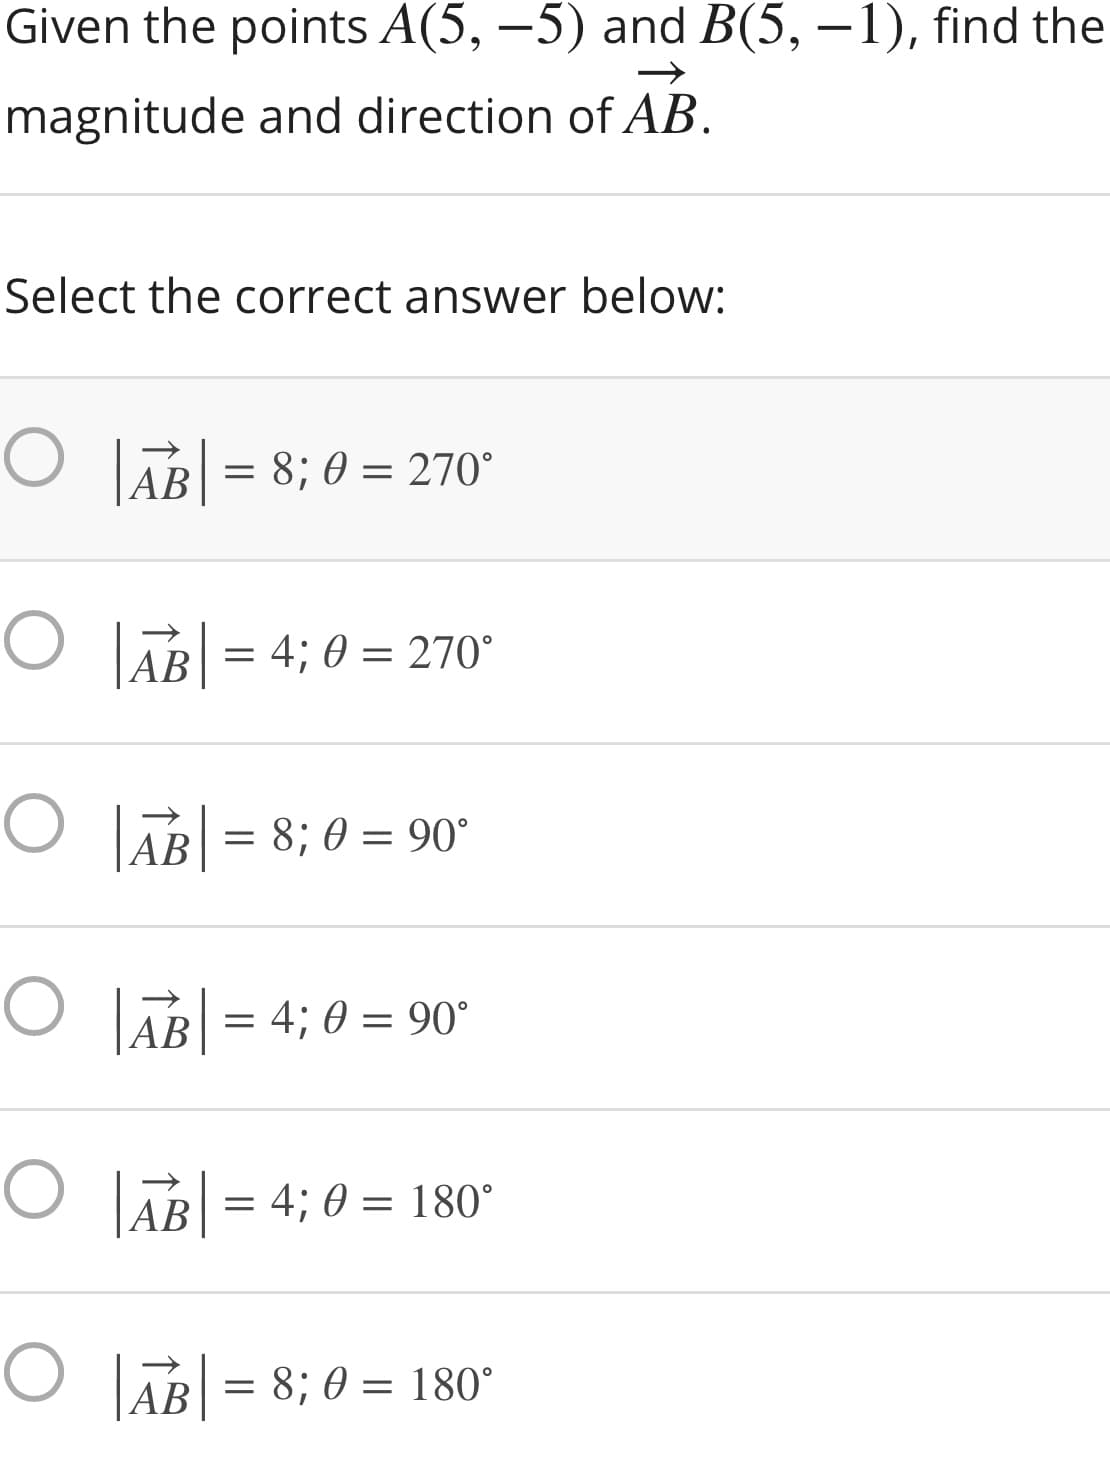 Given the points A(5, –5) and B(5, –1), find the
magnitude and direction of AB.
Select the correct answer below:
O lĀB| =
|AB
= 8; 0 = 270°
O AB = 4; 0 = 270°
|AB
O LAB = 8; 0 = 90°
O B = 4; 0 = 90°
AB
AB = 4; 0 = 180°
O TAB = 8; 0 = 180°
